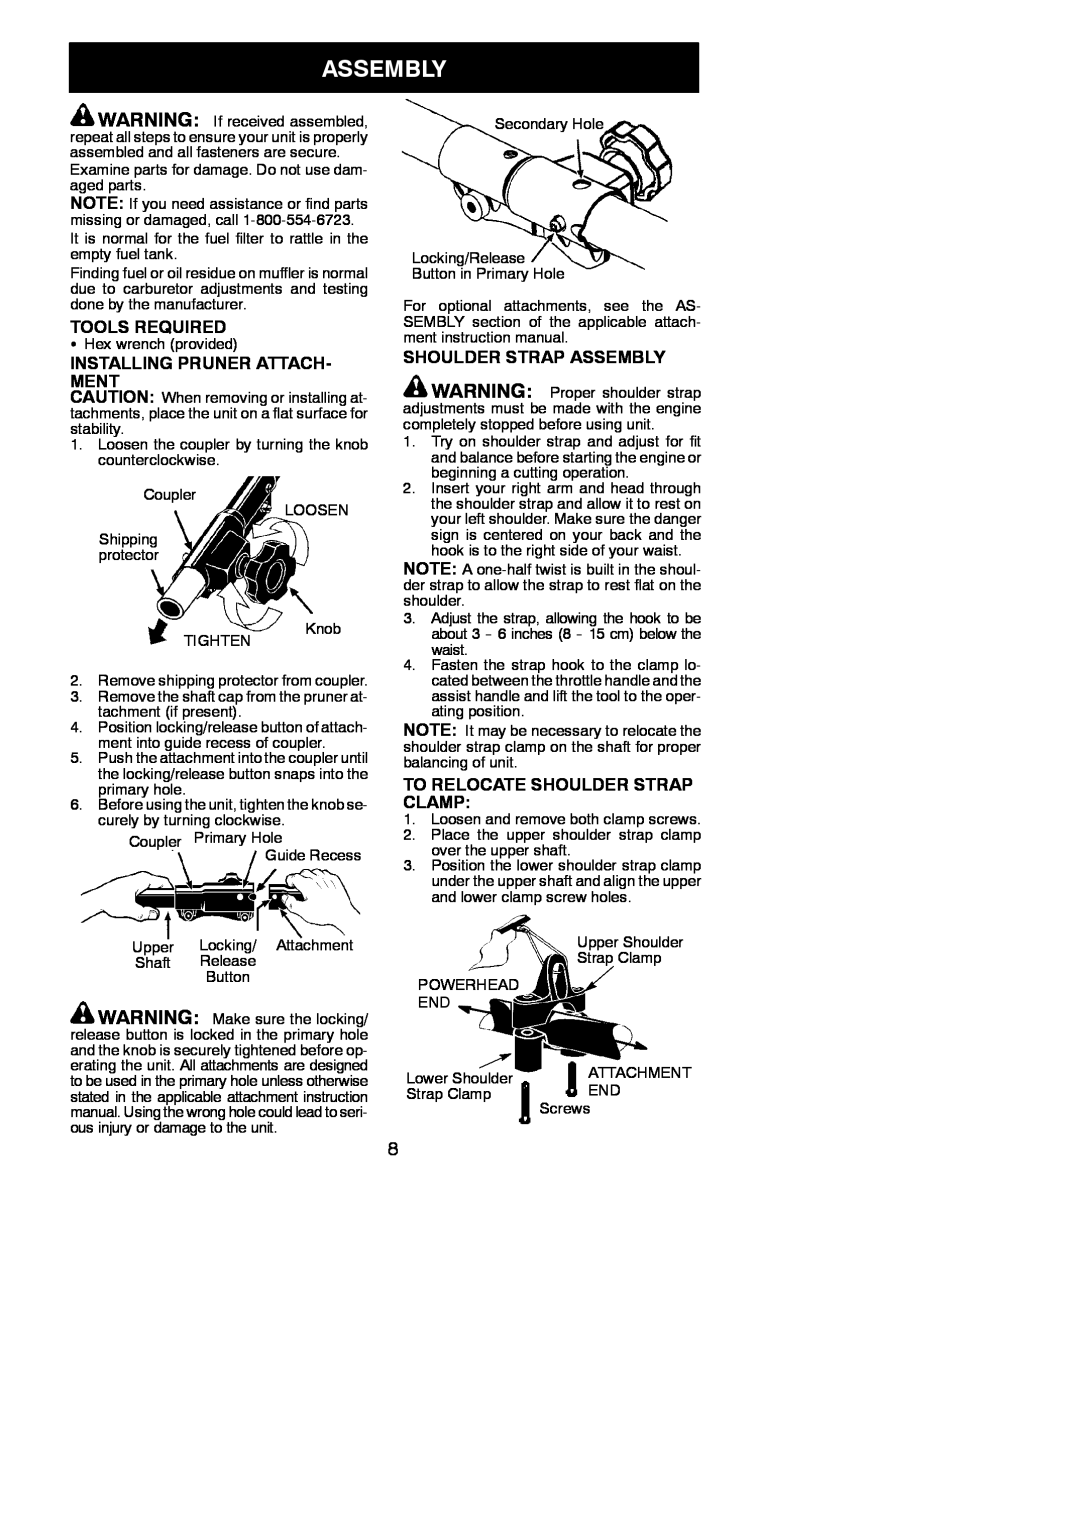 Poulan SM446E instruction manual Tools Required, Installing Pruner Attach- Ment, Shoulder Strap Assembly 